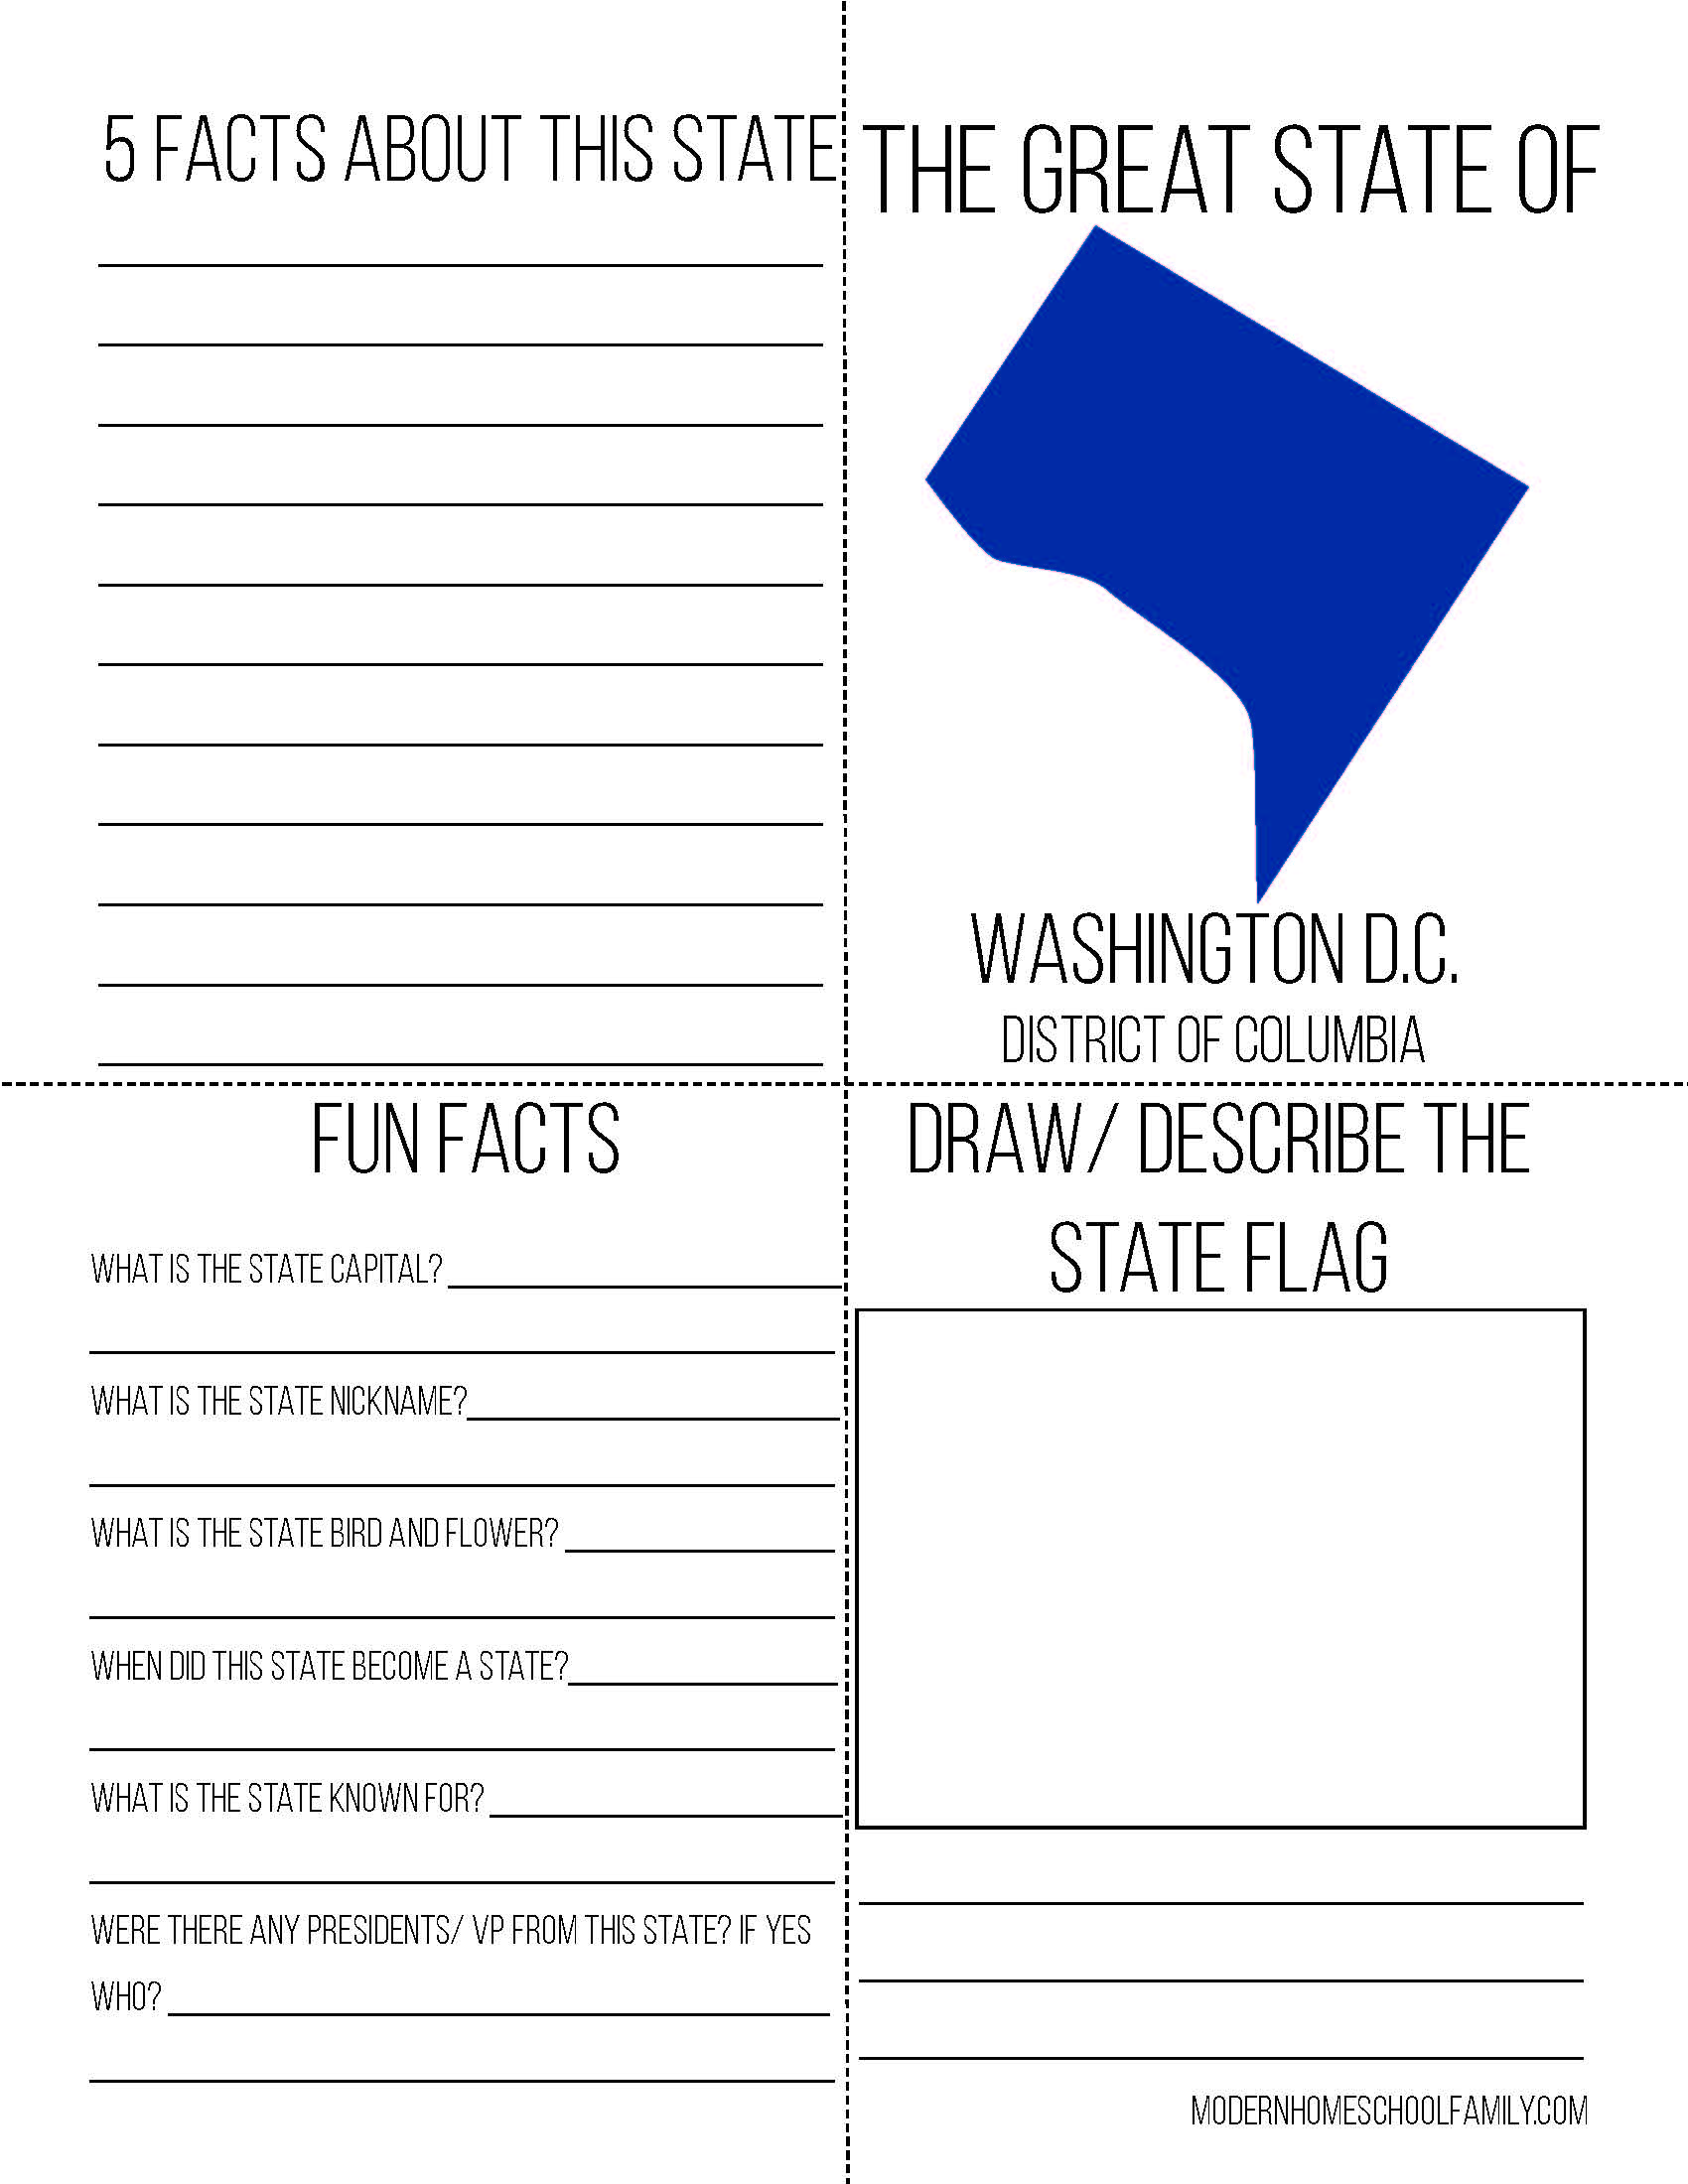 50 States Notebooking Unit for Homeschoolers (Full Color)